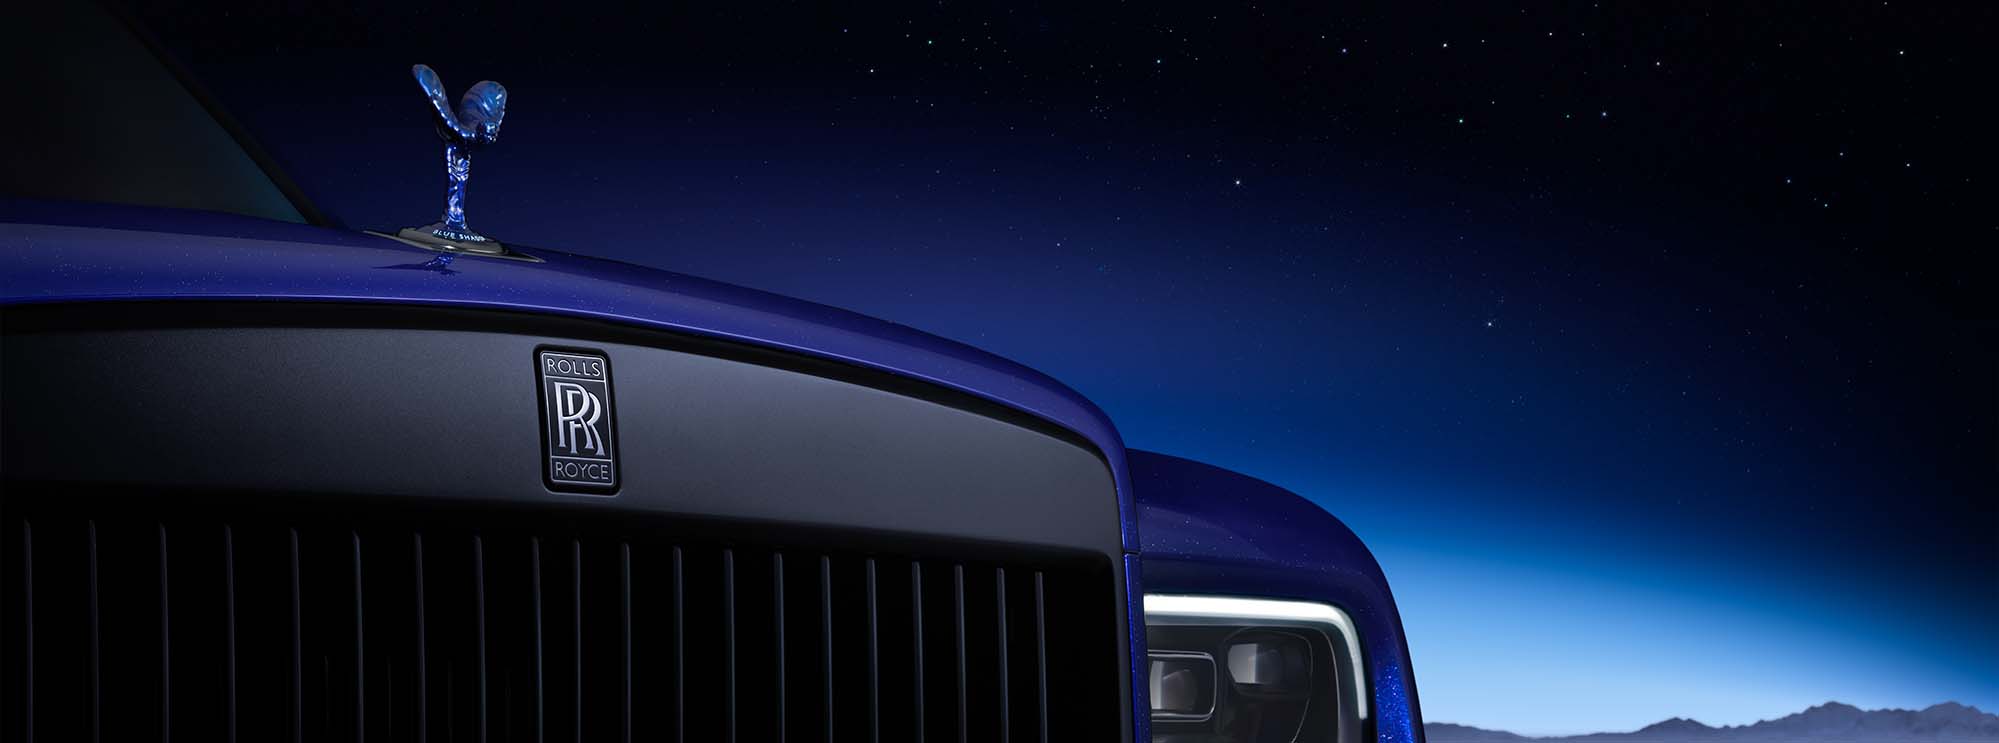 Rolls-Royce Cullinan front grille and headlights under stary moonlit sky